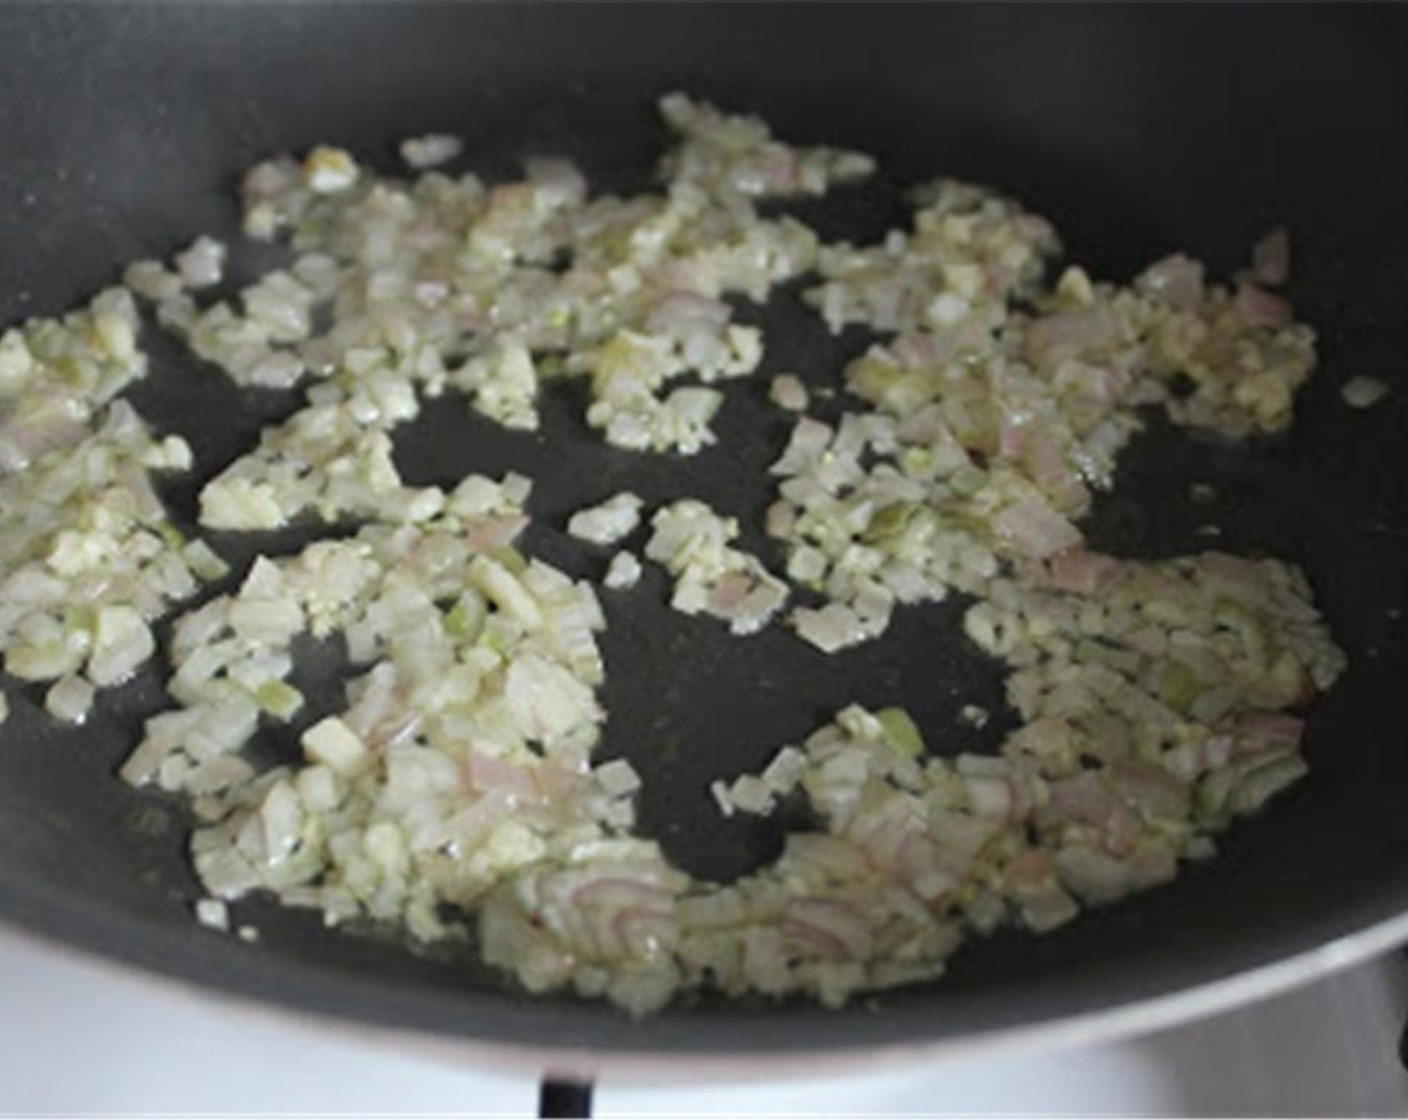 step 4 Heat Extra-Virgin Olive Oil (2 Tbsp) in an 8-10 inch non-stick pan. When hot, add chopped shallots and garlic and cook for 2 minutes.